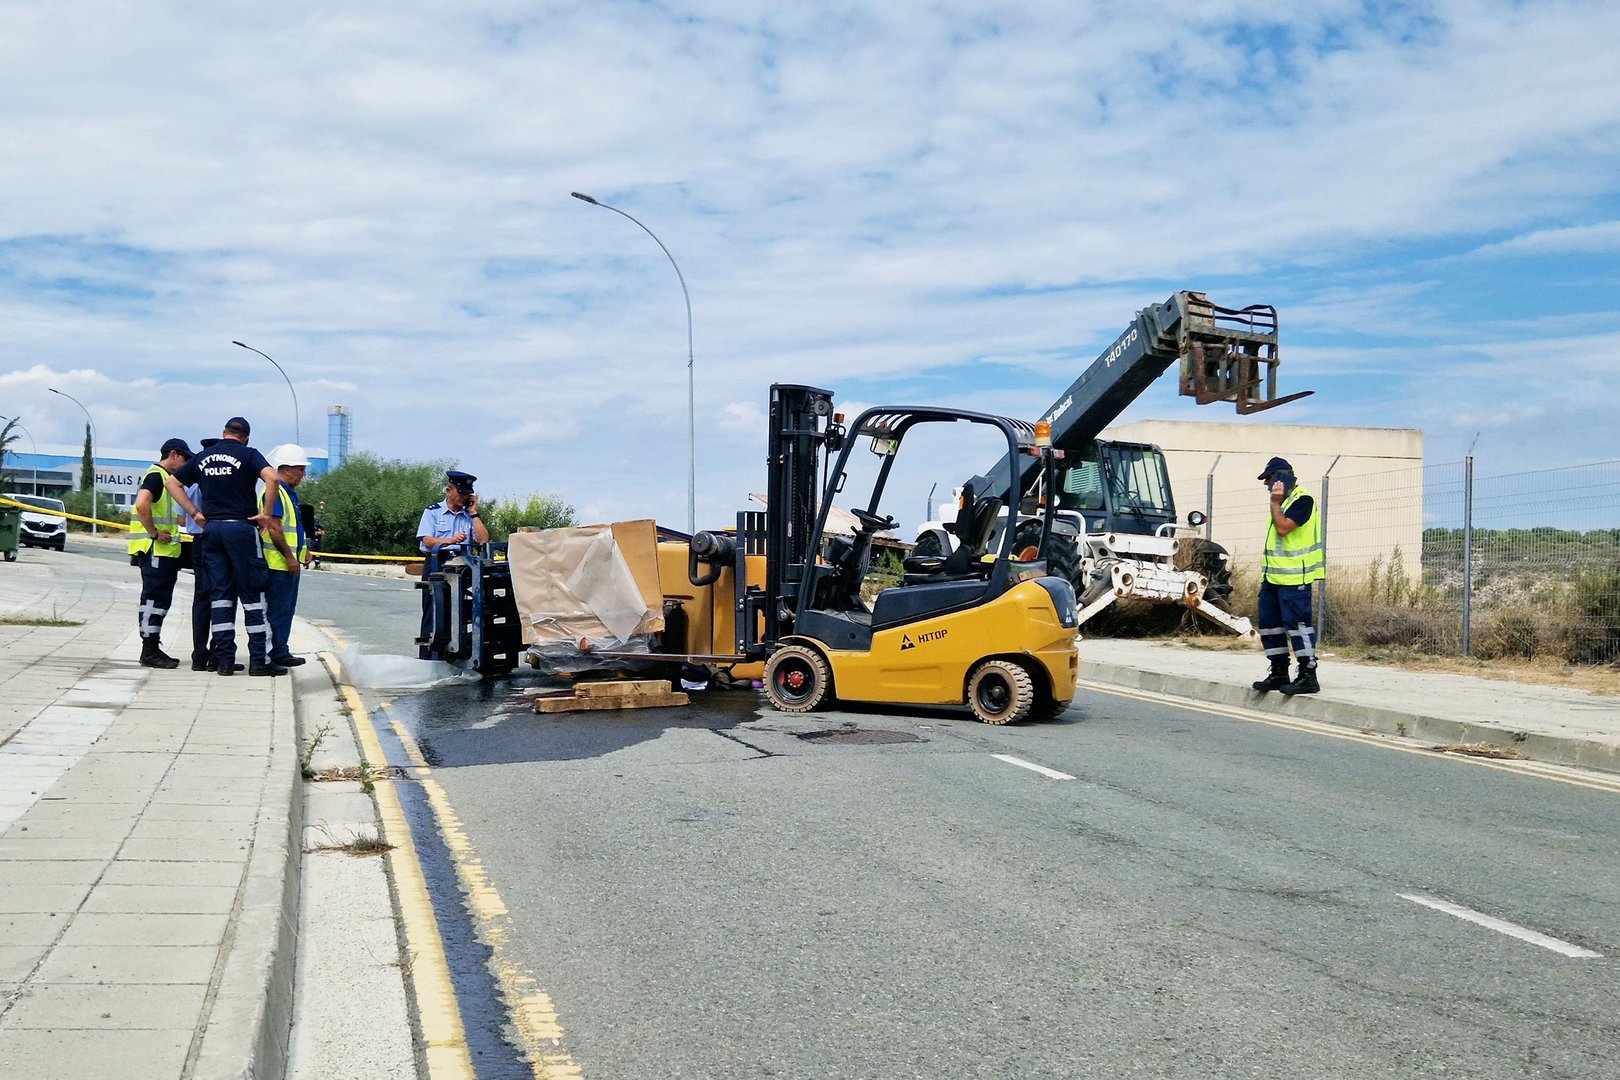 image Forklift accident claims life of 29-year-old in Limassol